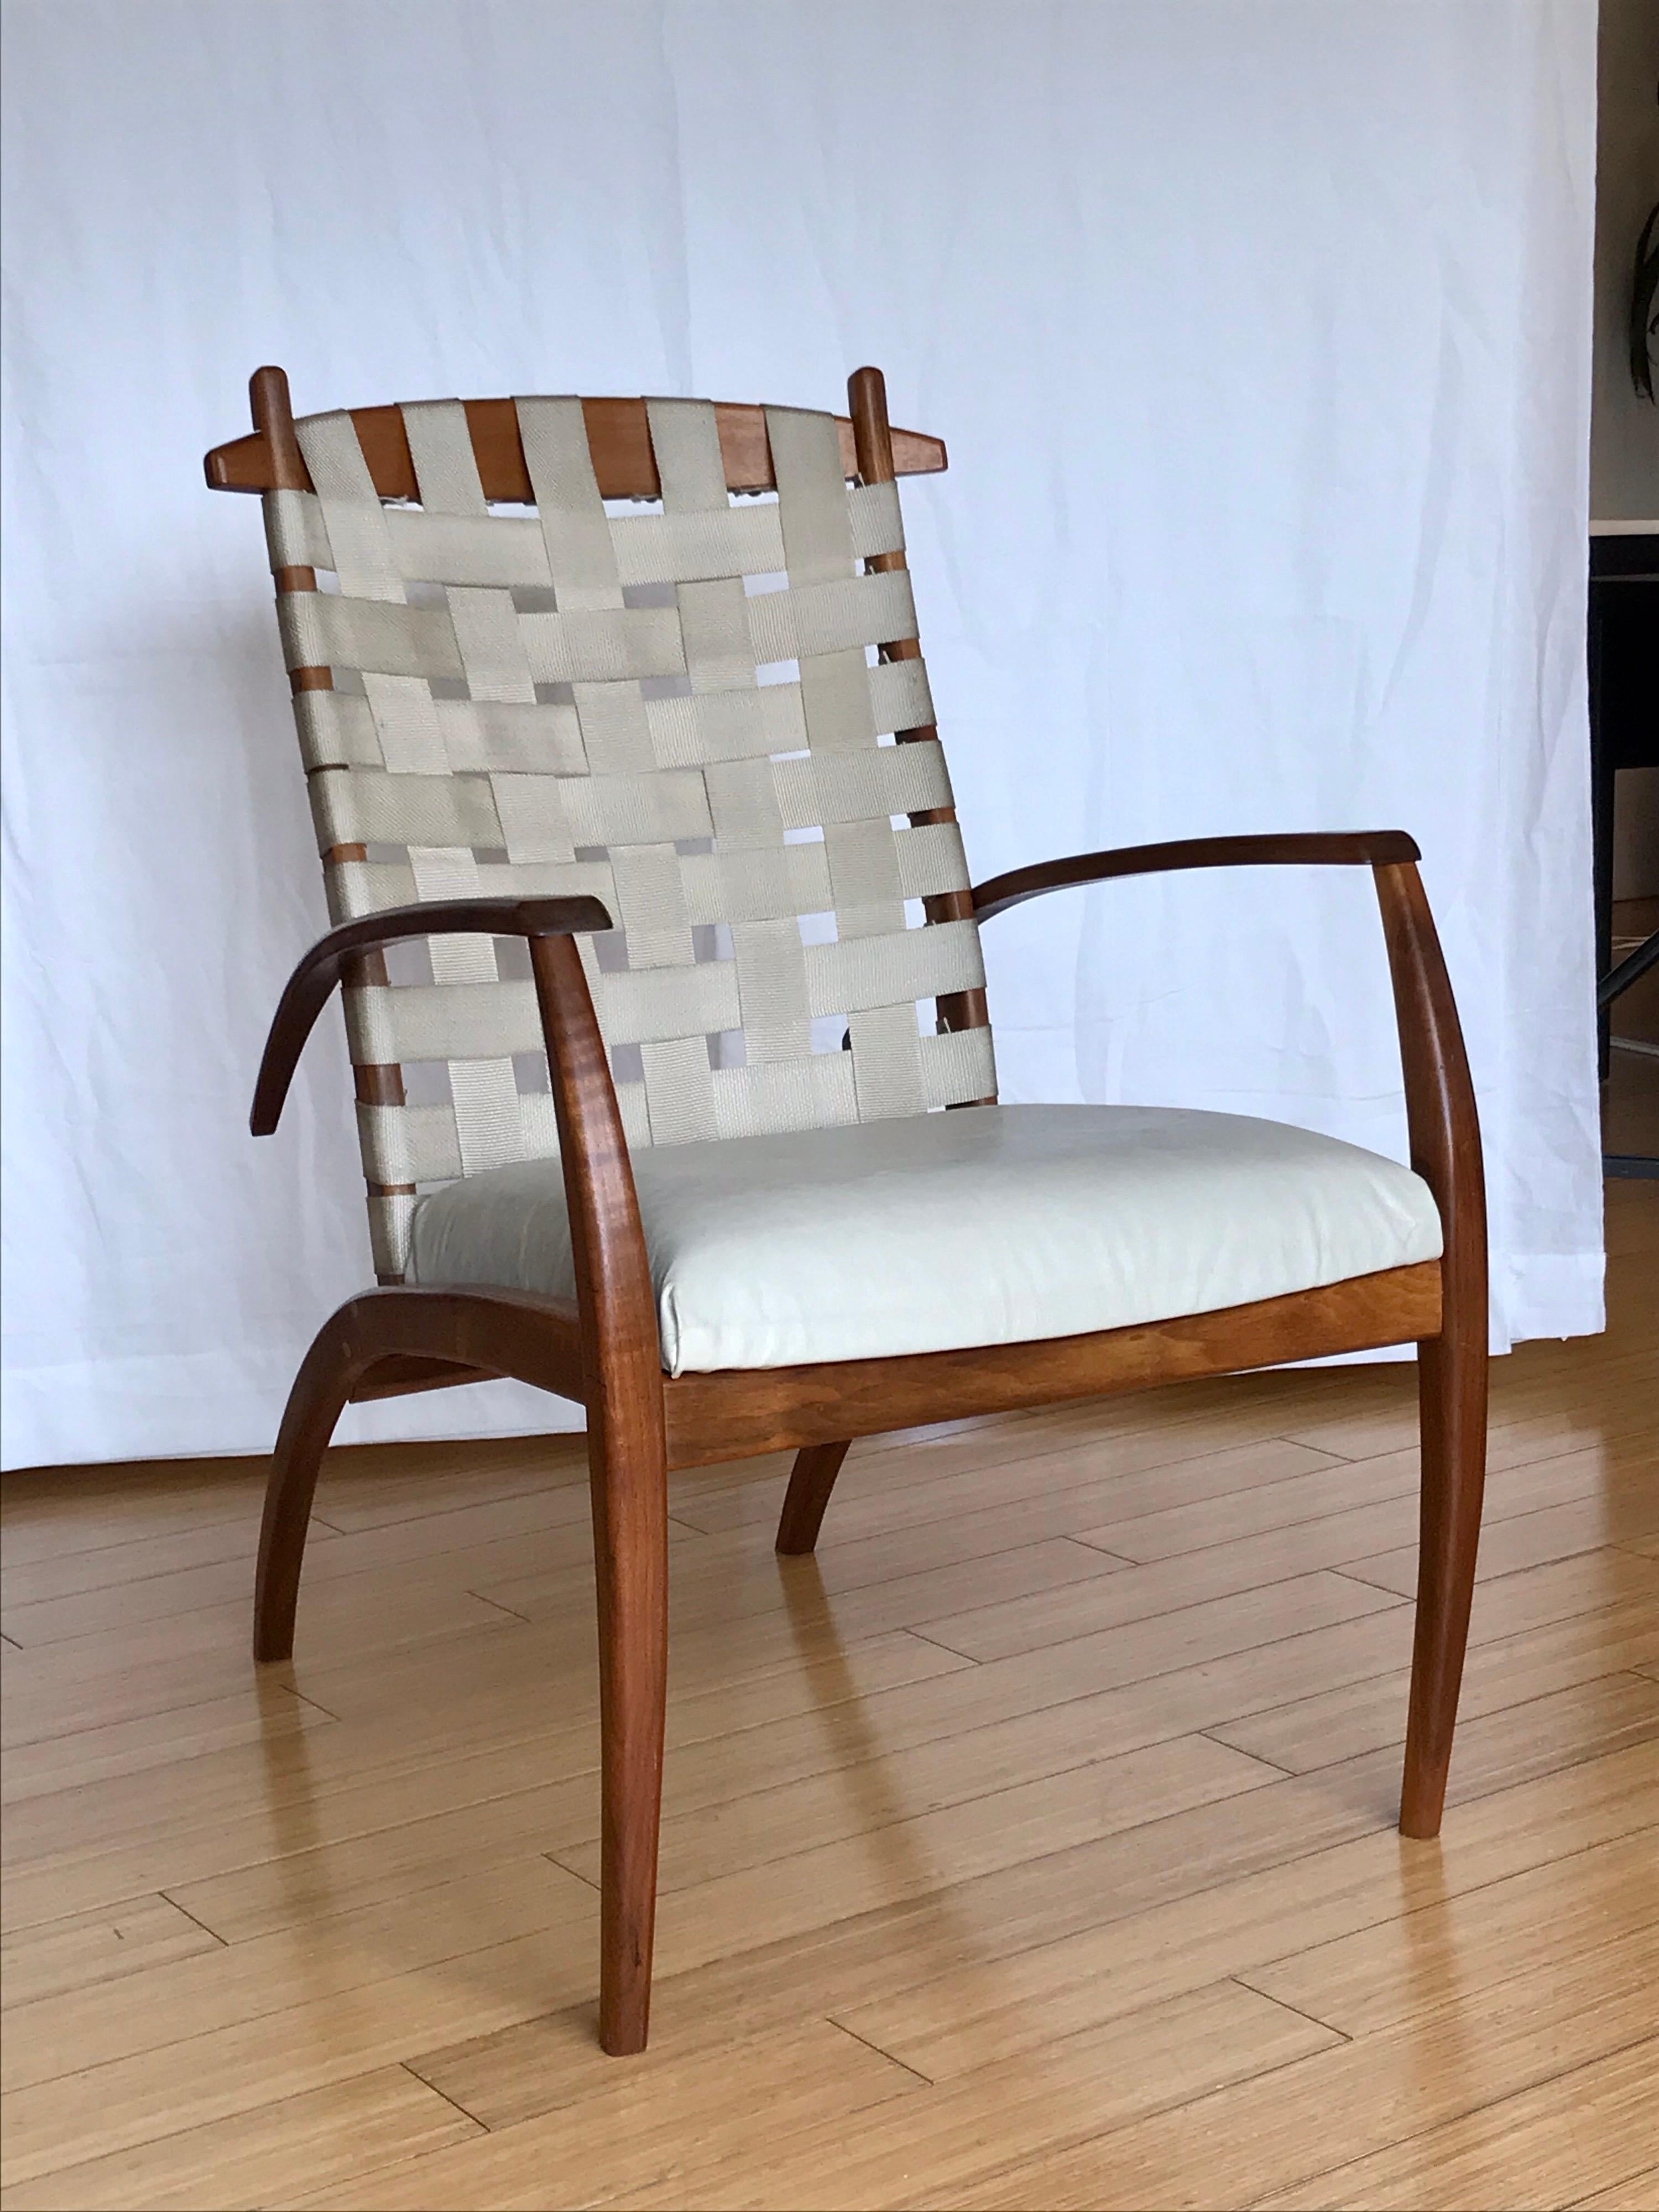 A unique design
hand crafted, appears to be walnut or other with nice bent wood detailing
parachute strap backrest with light grey leather seat
sturdy, comfy and stout 
statement / accent piece.